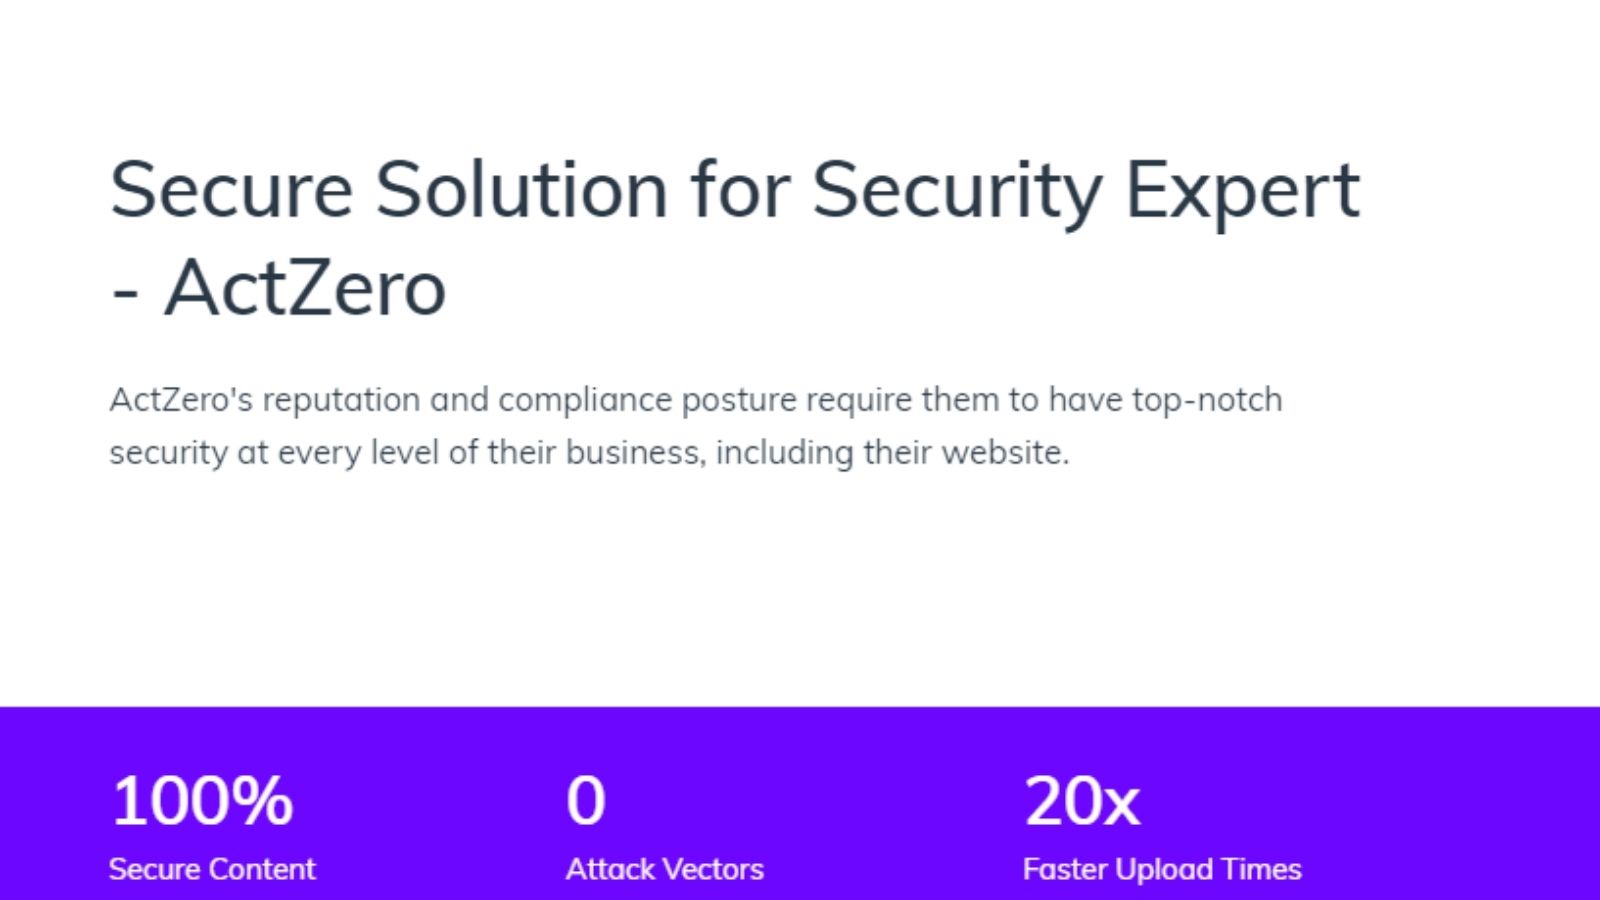 Enterprise security case study with Agility CMS